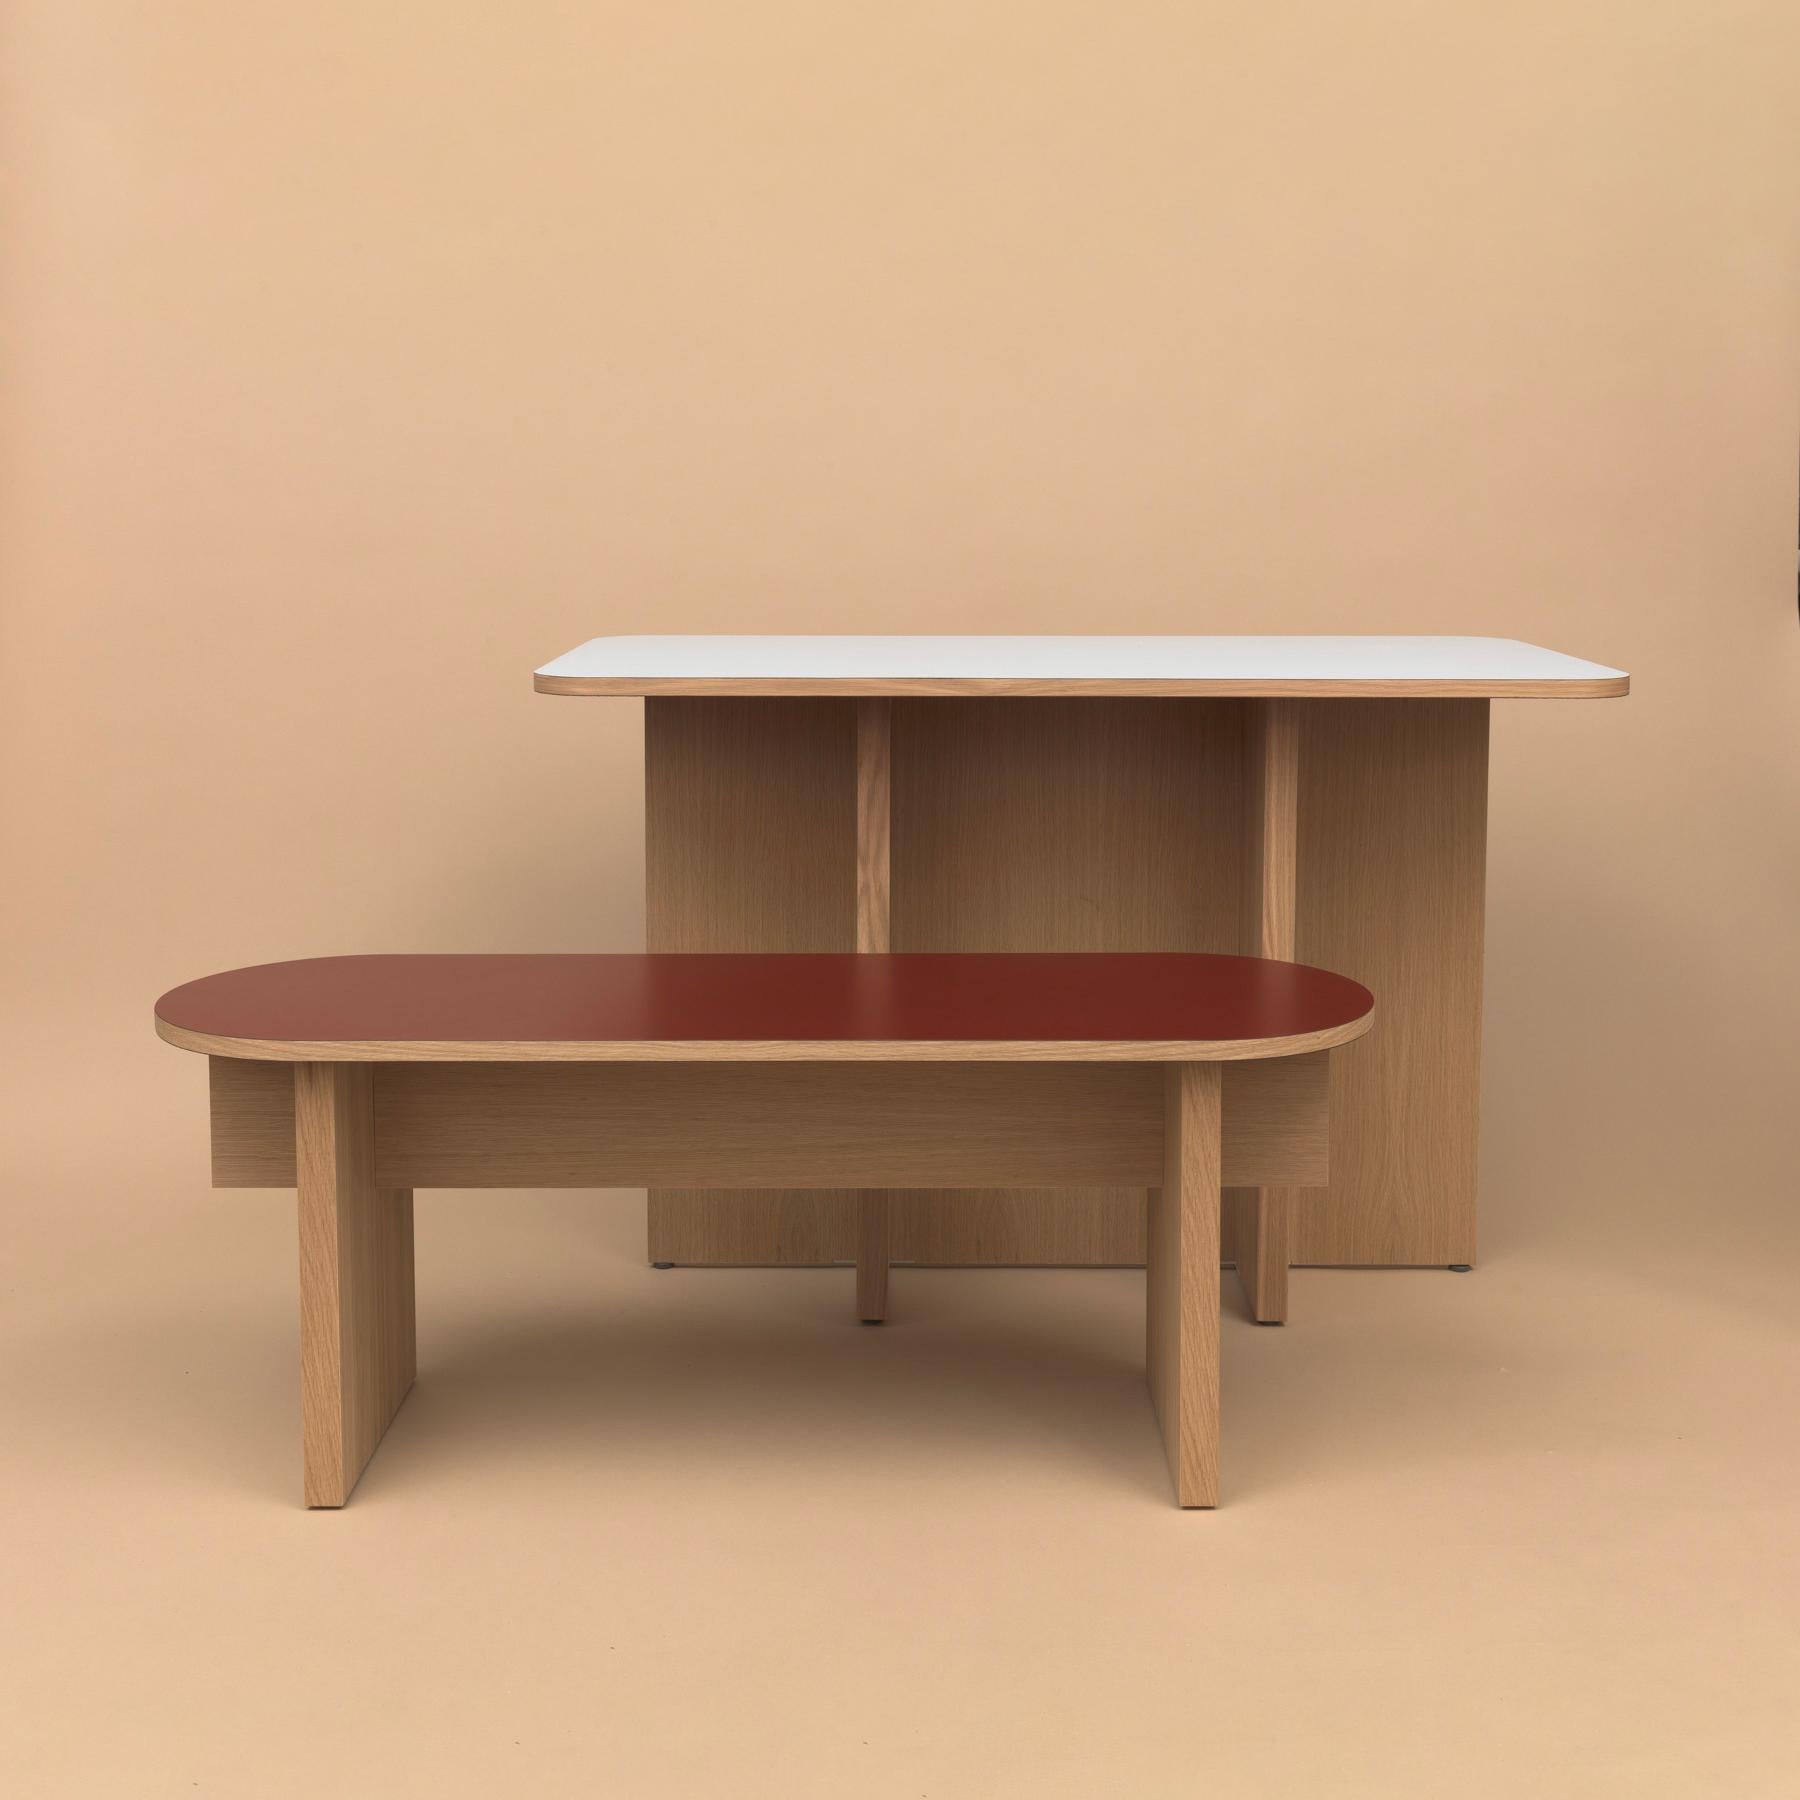 Contemporary T-Top Dining Table in White Oak Veneered Plywood and Colorful Laminate